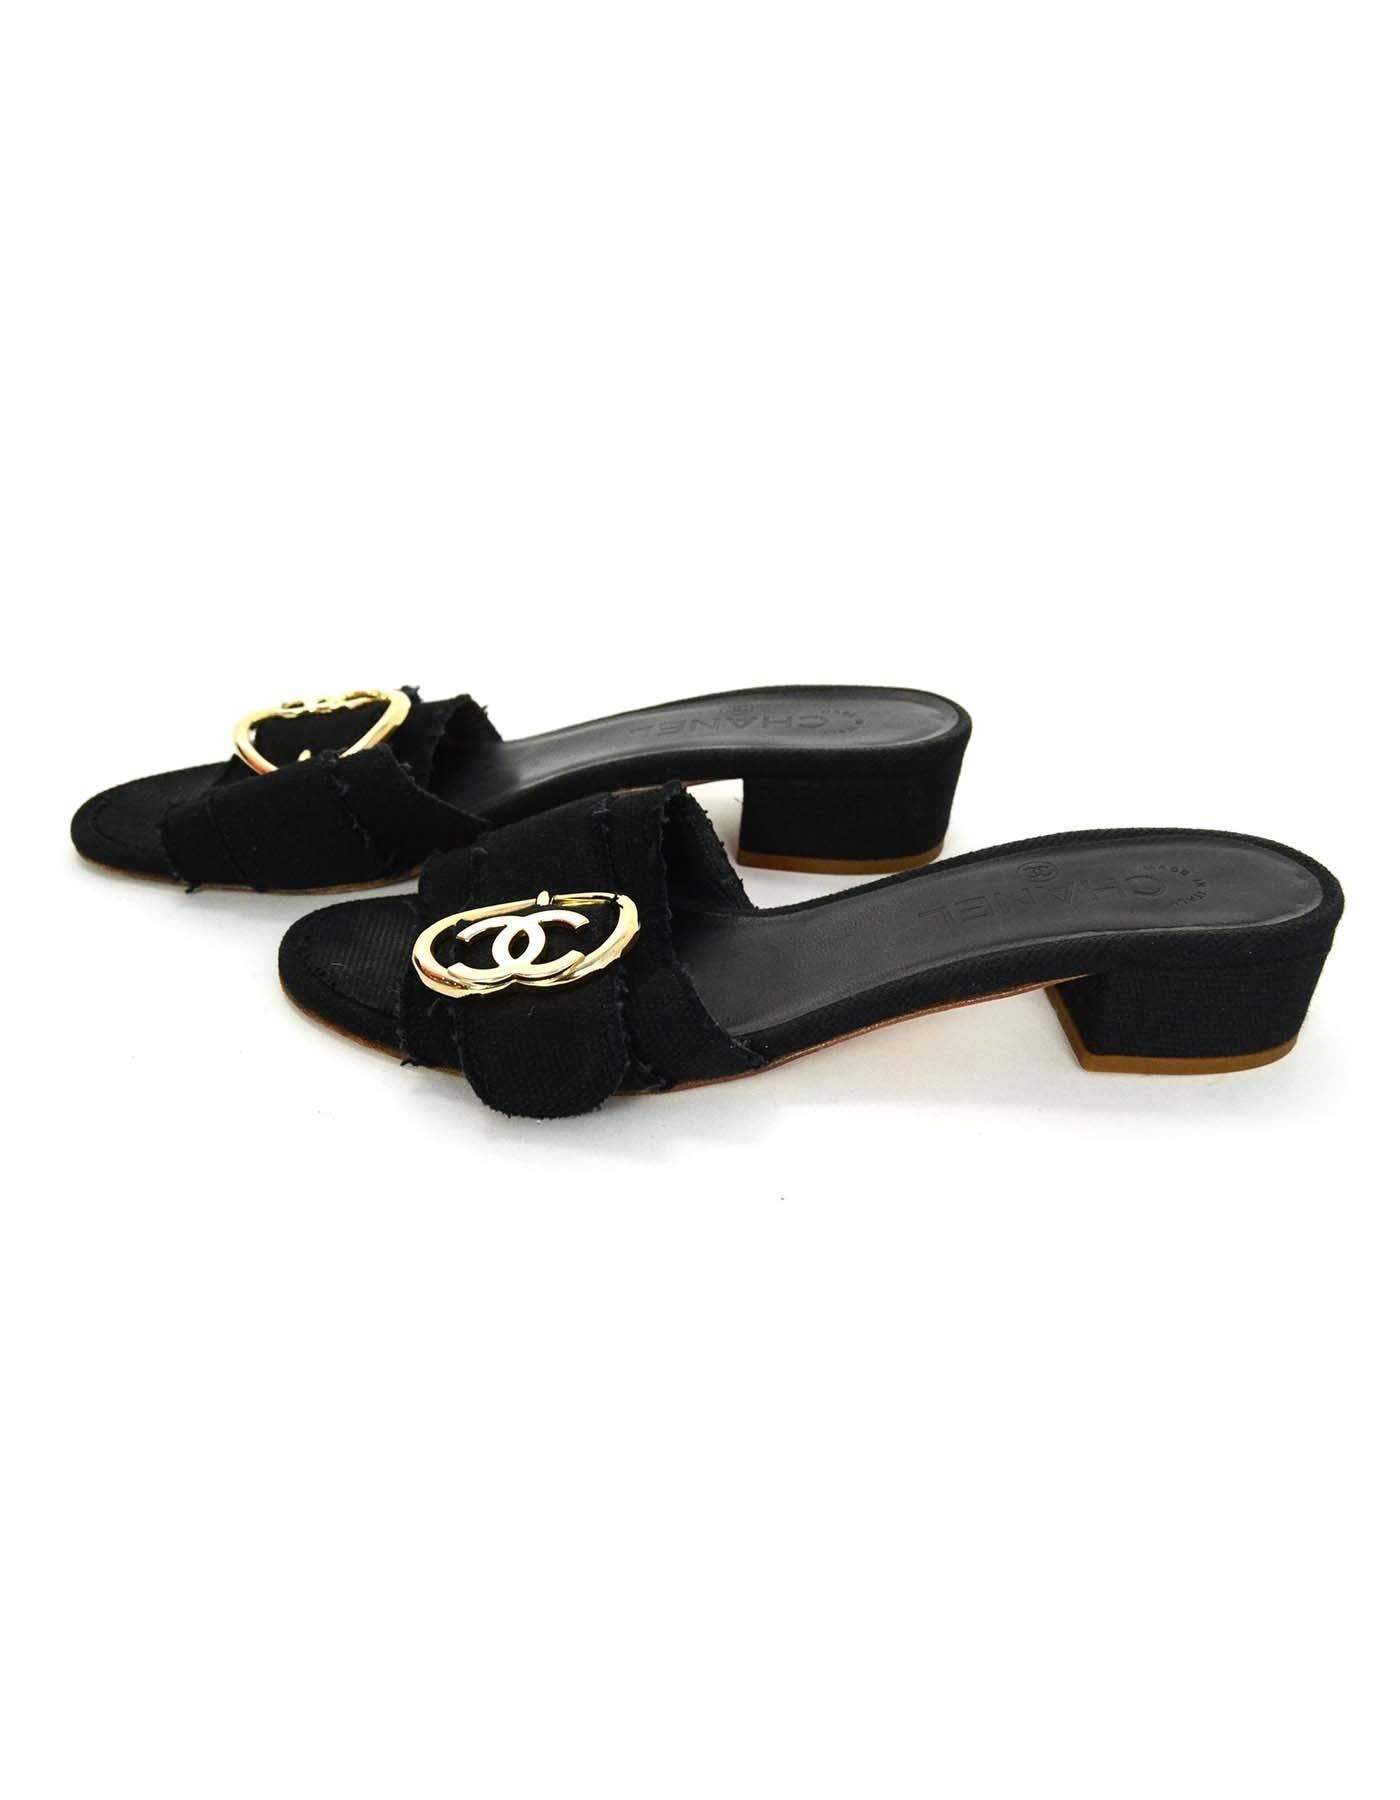 Chanel Black Linen Mules Sz 38.5

Features goldtone CC heart buckle

Made In: Italy
Color: Black and silver
Materials: Linen and metal
Closure/Opening: Slide on
Sole Stamp: CC Made in Italy 38.5
Overall Condition: Very good pre-owned